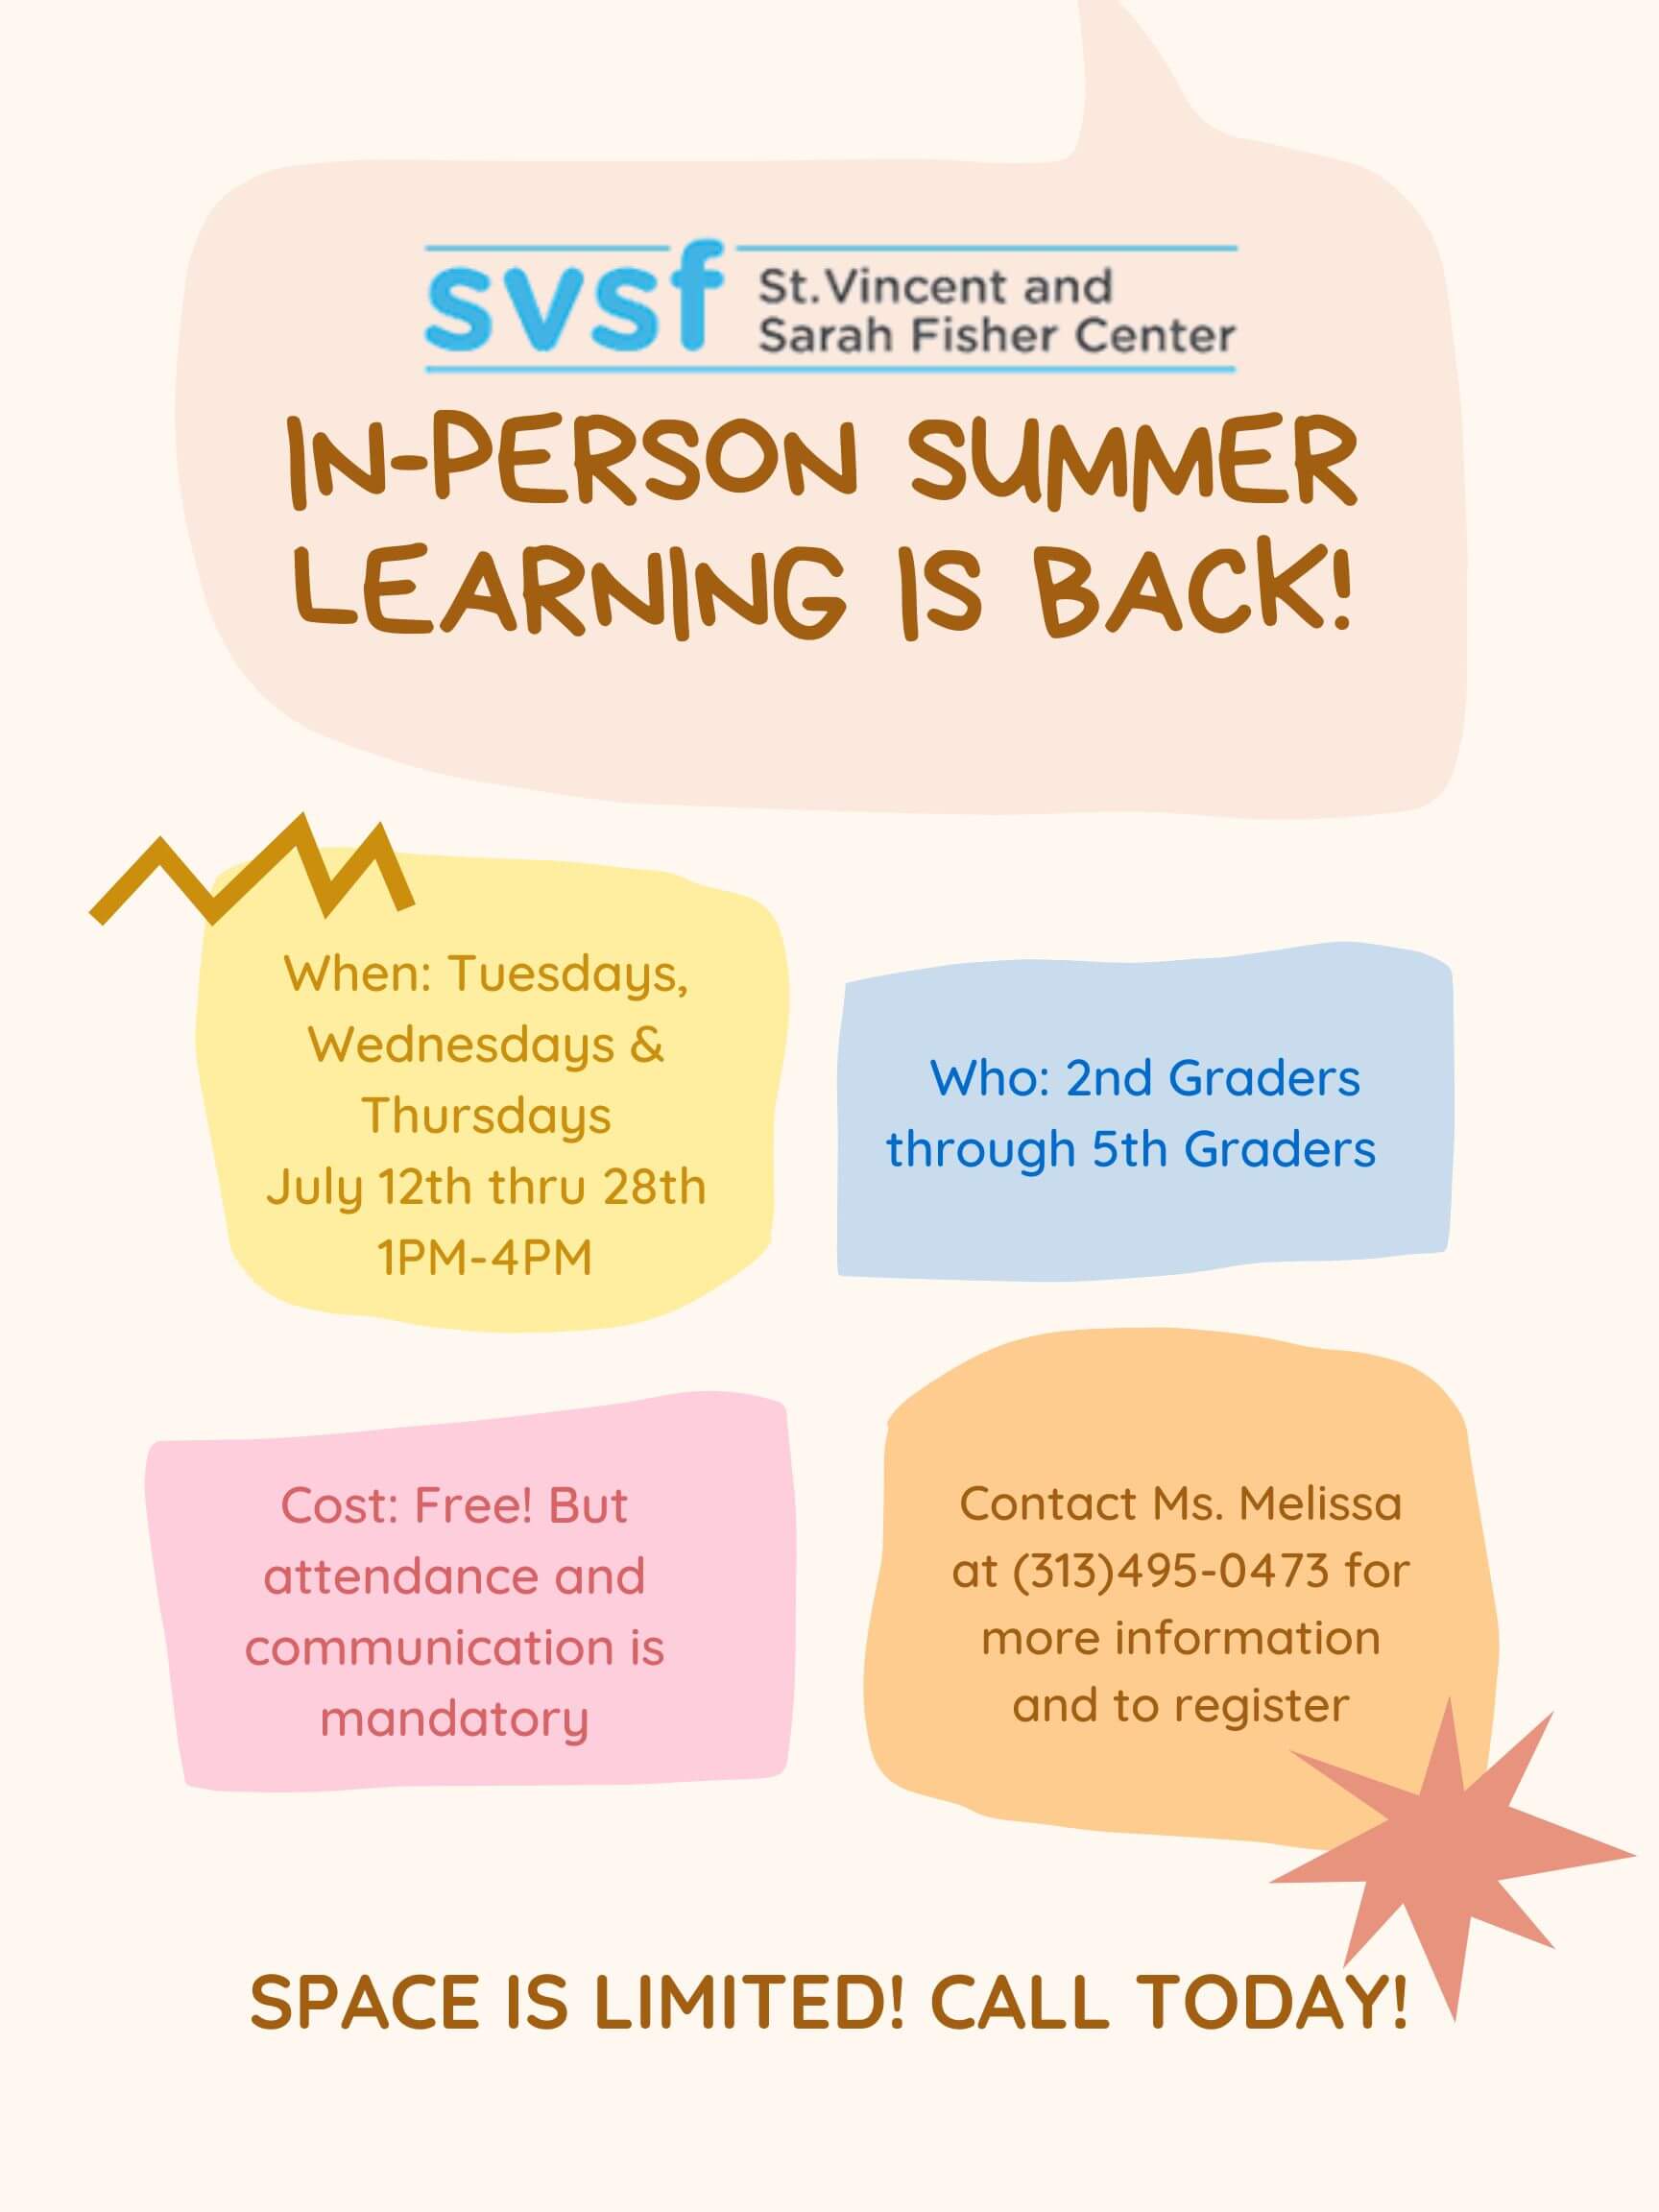 In-Person Tutoring is Back!